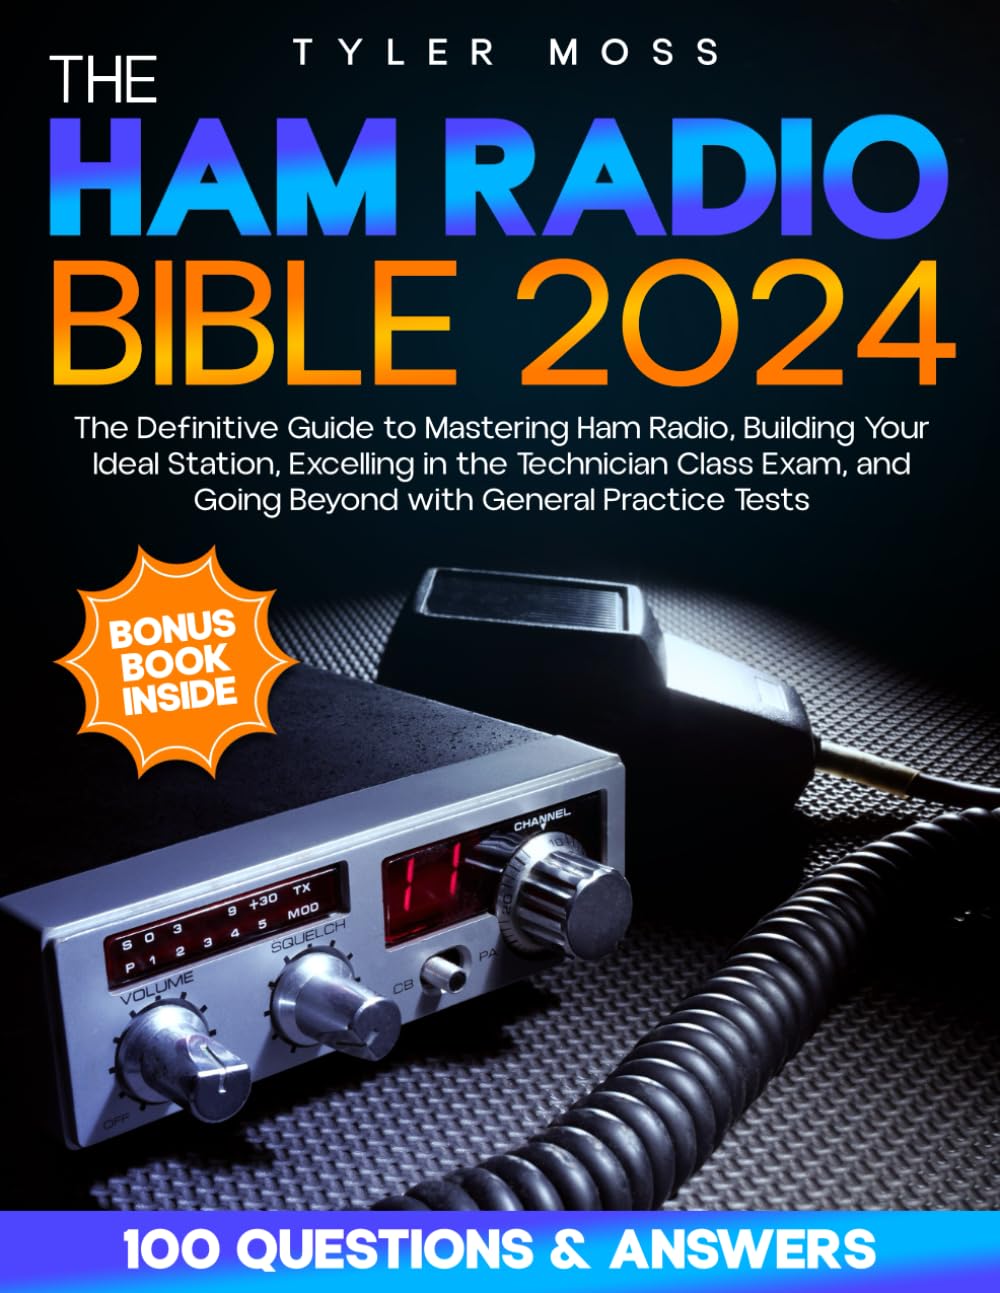 Ham Radio Bible: The Definitive Guide to Mastering Ham Radio, Building Your Ideal Station, Excelling in the Technician Class Exam, and Going Beyond with General Practice Tests